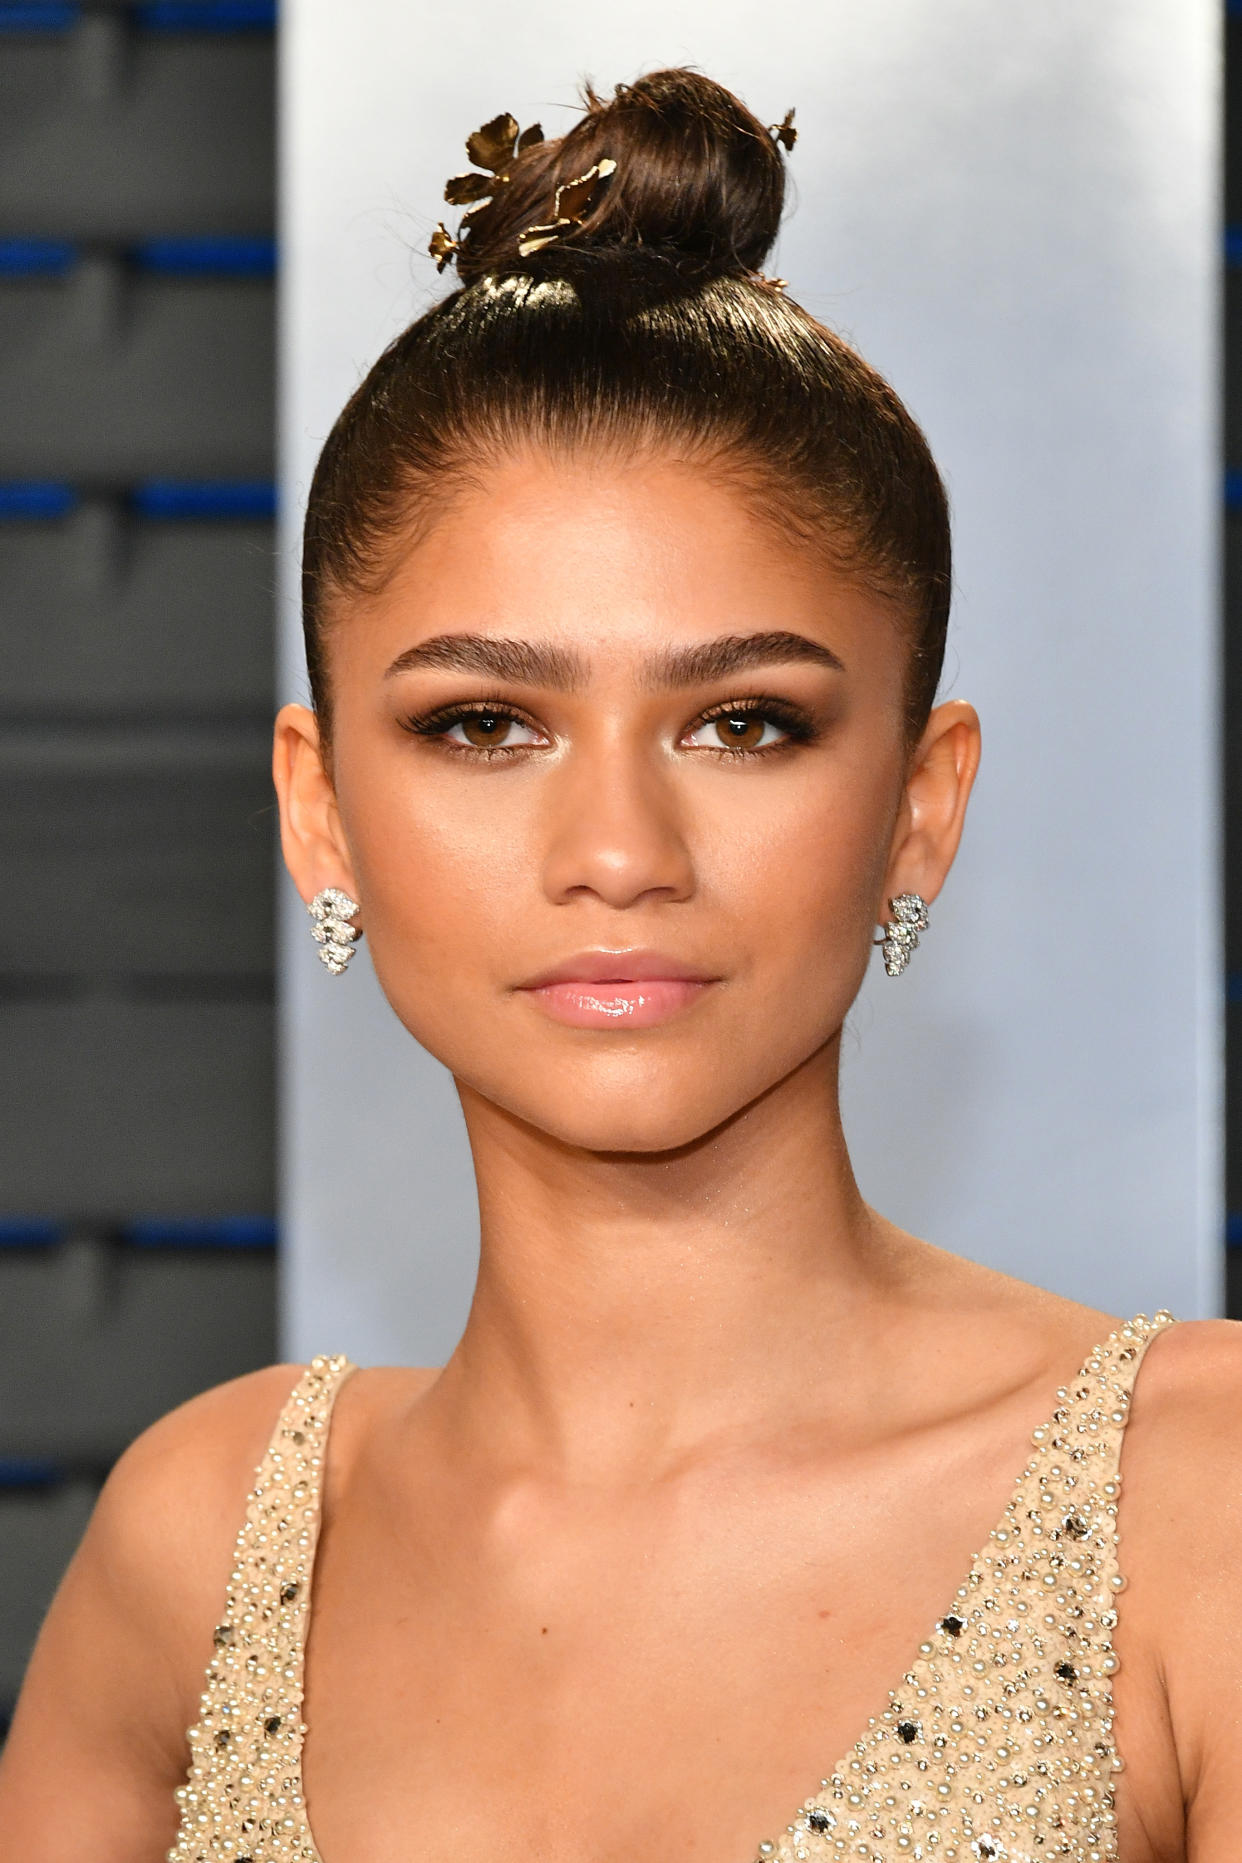 Zendaya, pictured in full glam mode at the 2018 Oscars, has opted for a softer look. (Photo: Dia Dipasupil/Getty Images)